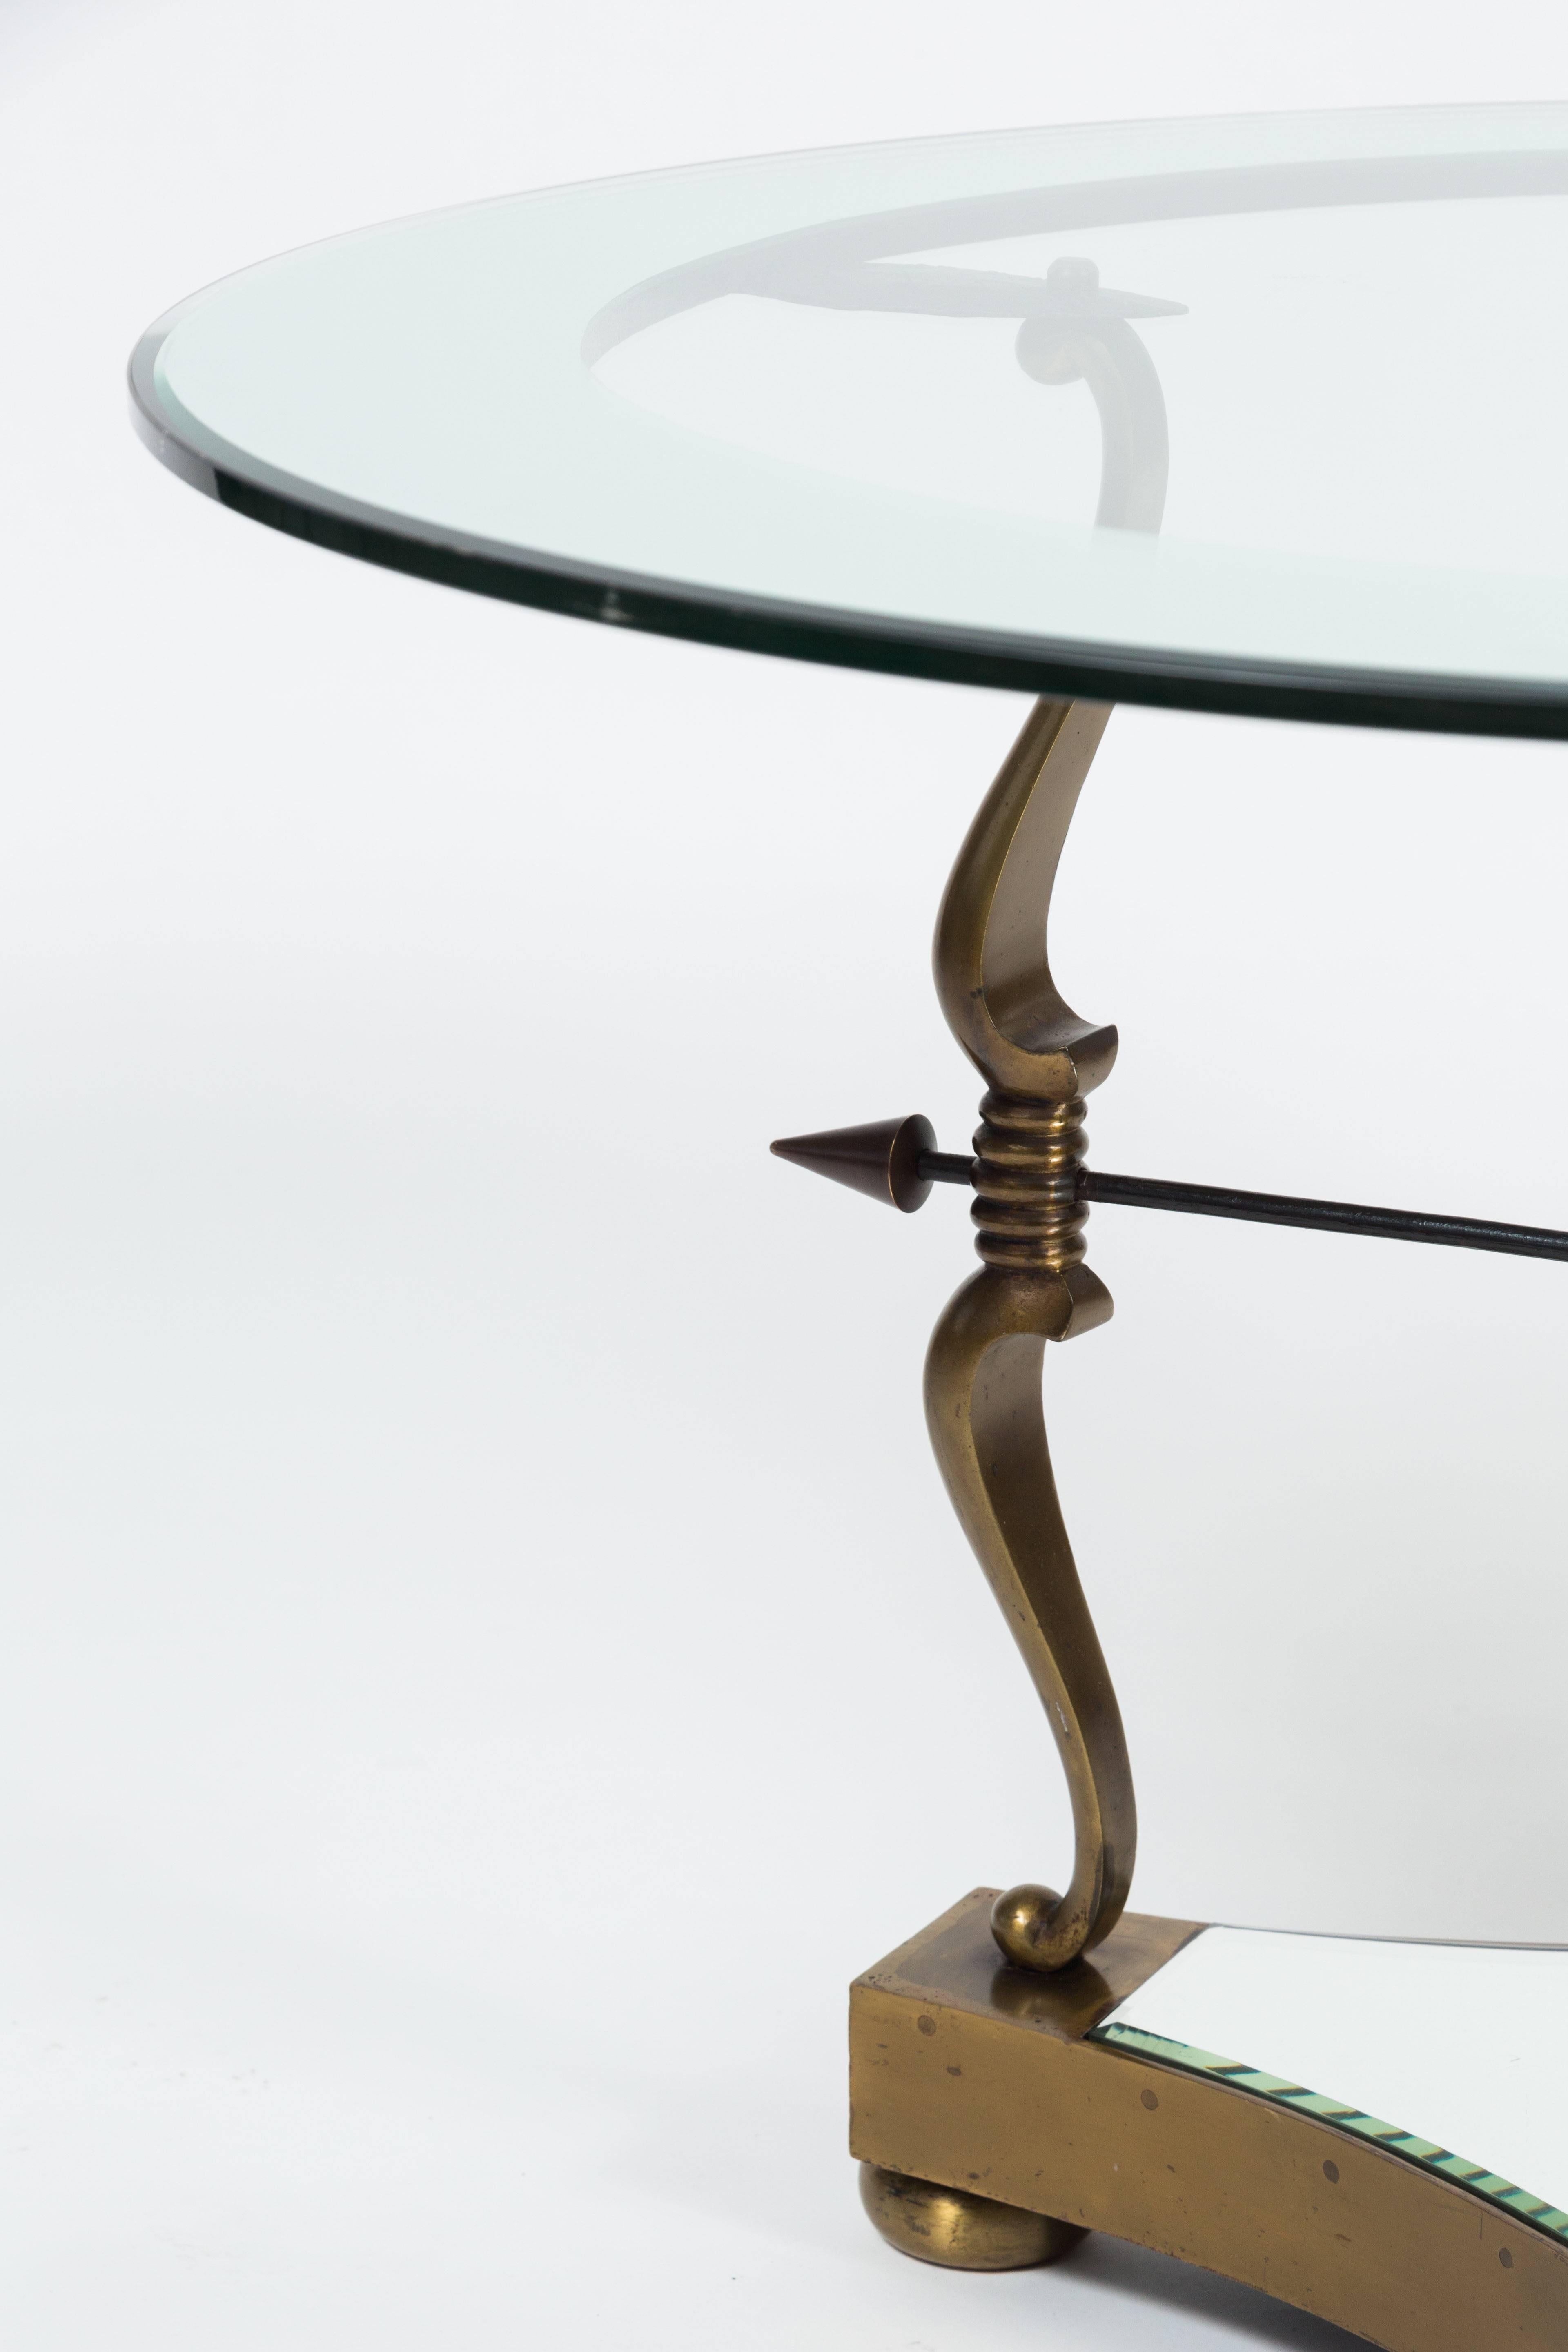 Wonderful and striking table by important Mid-Century designers, Roberto & Mito Block. Bronze and brass, featuring bow and arrow and wrought iron leaf decorative motifs. With original mirrored base insert, mirrored and beveled glass top.
Robert and